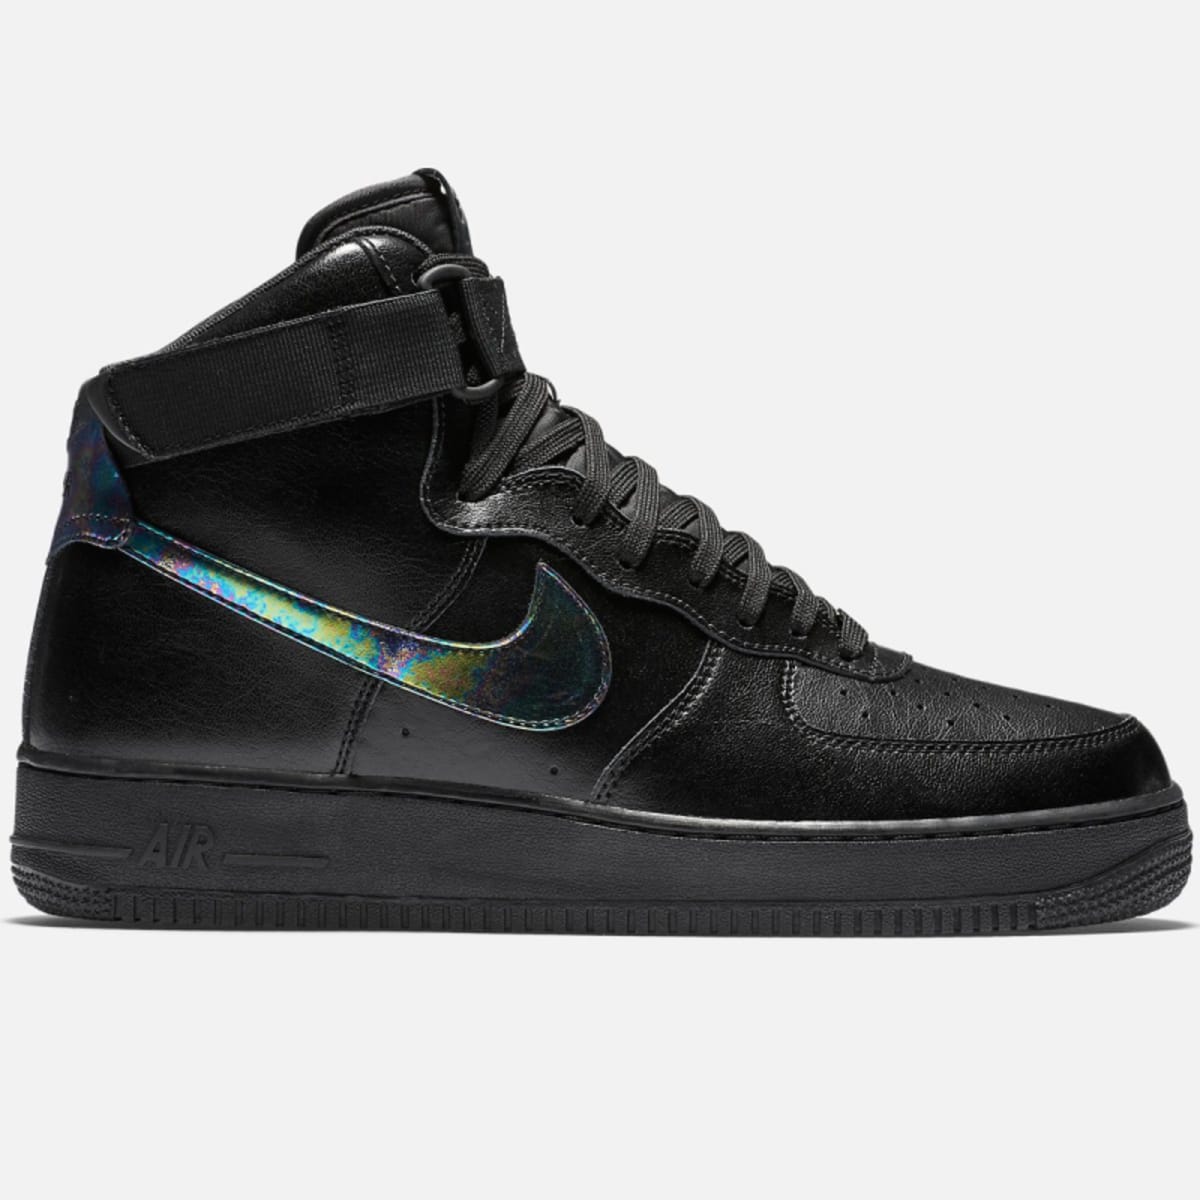 Nike Air Force 1 07 High LV8 - Great Buys Sneakers July 2016 | Sole ...